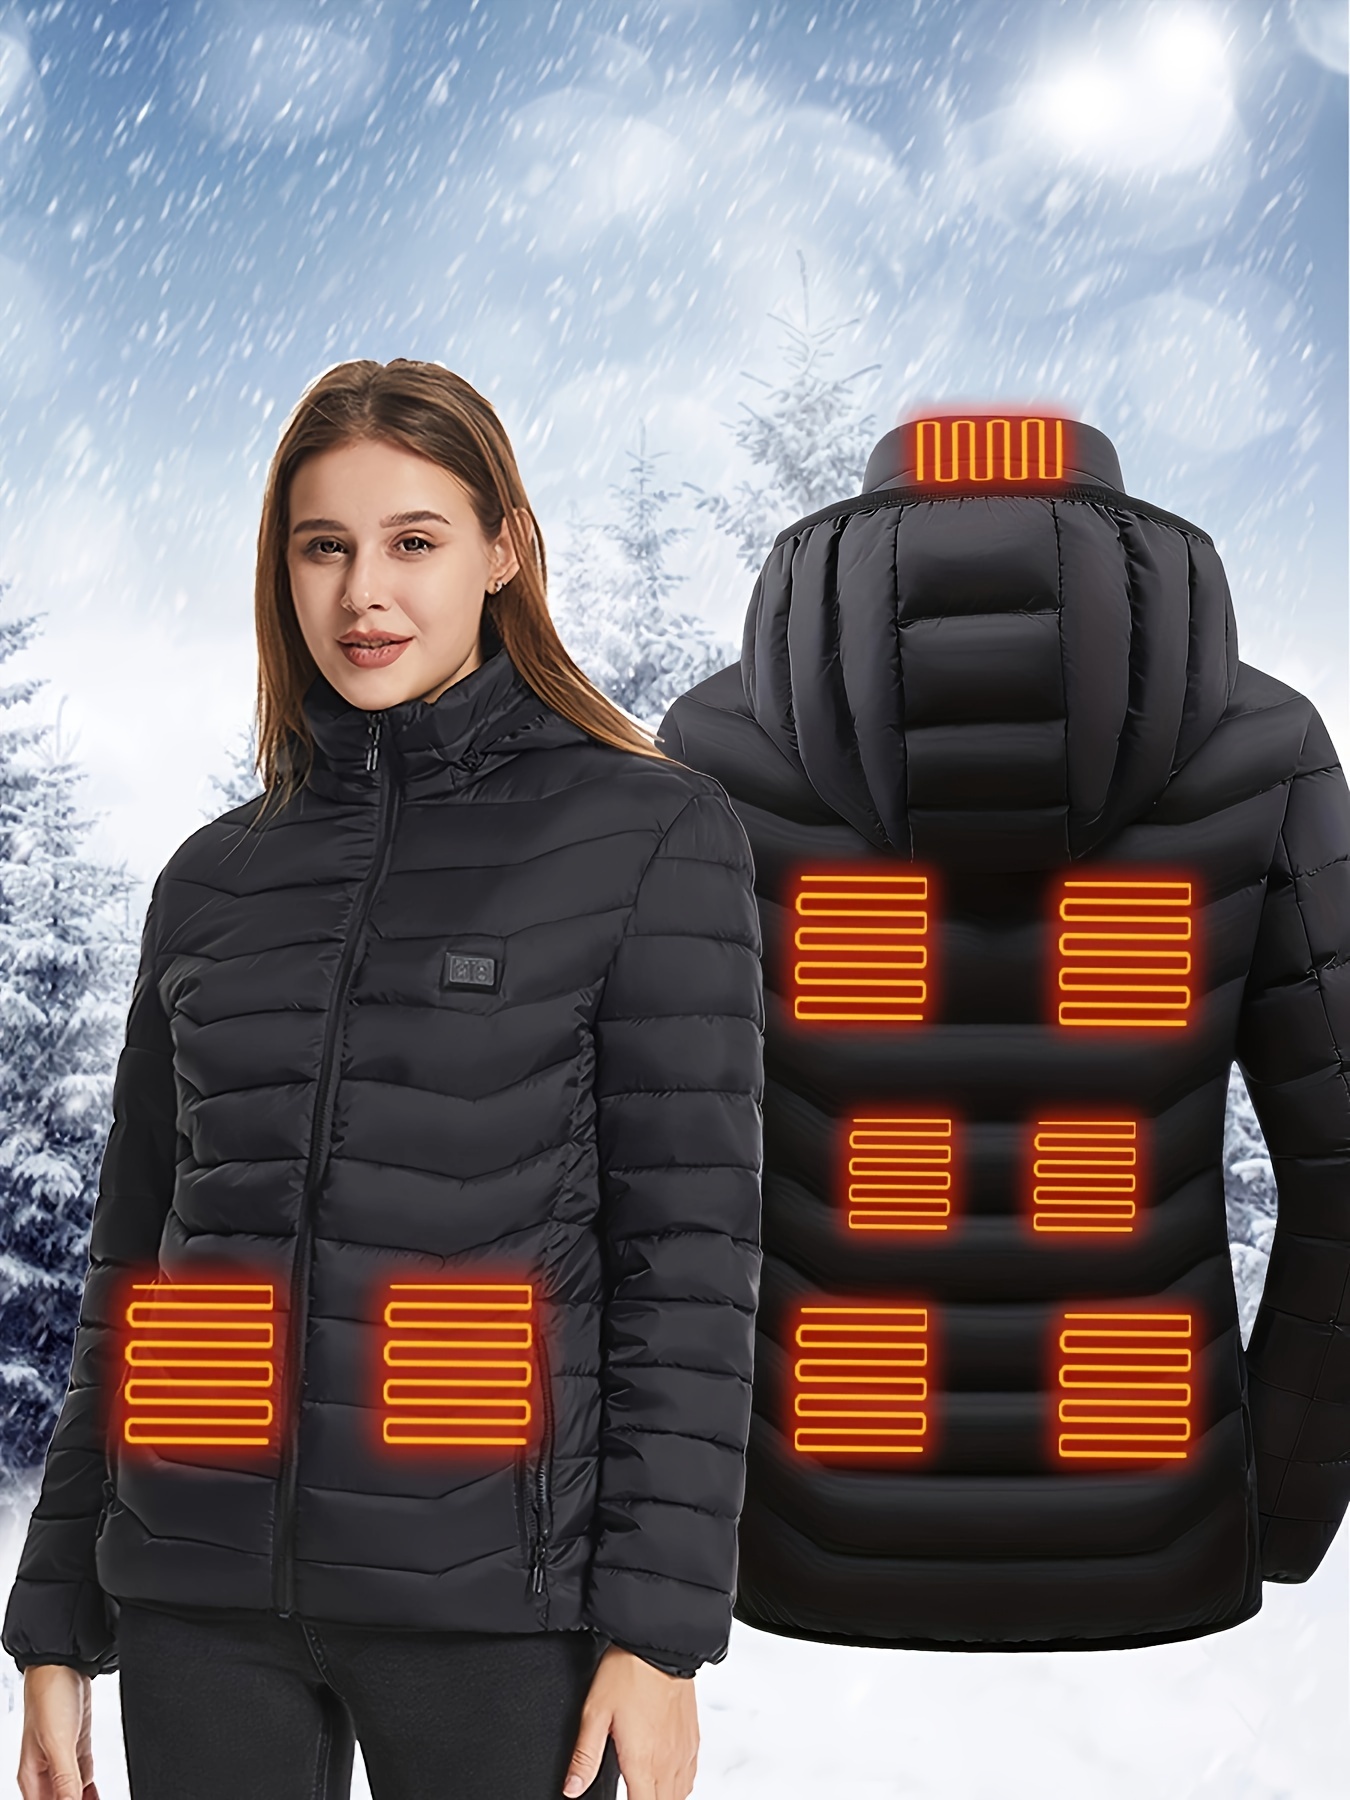 Heated Jacket Women Long Outdoor Warm Clothing Heated For Riding